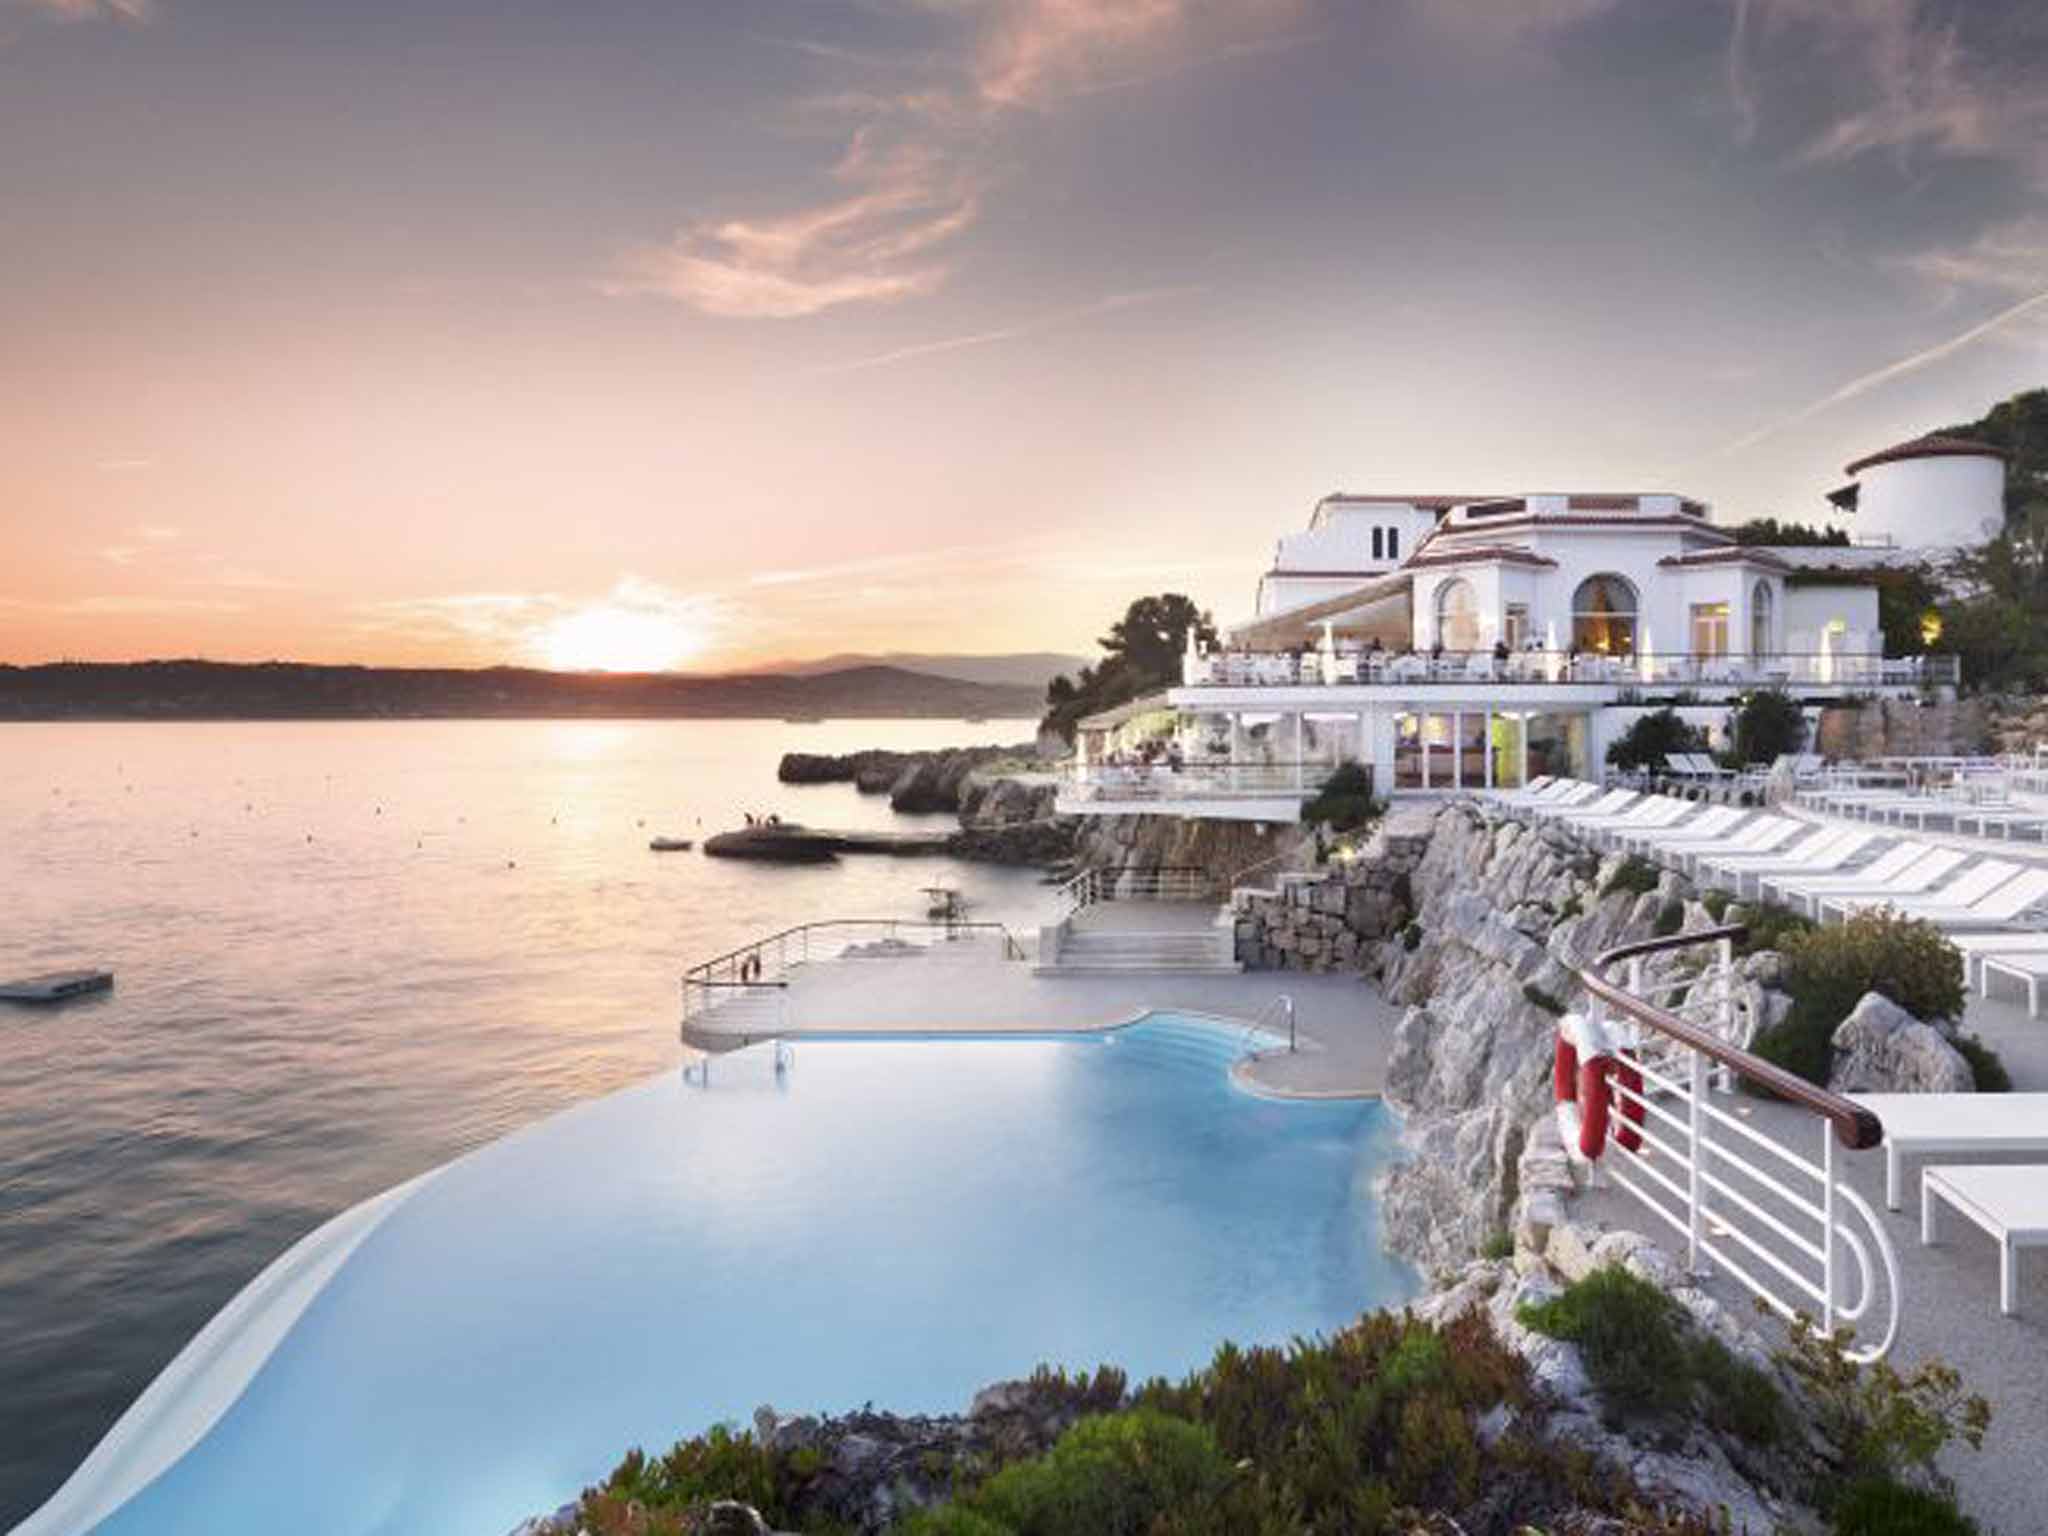 Guests enjoying an event at the luxury Hotel du Cap were left terrified